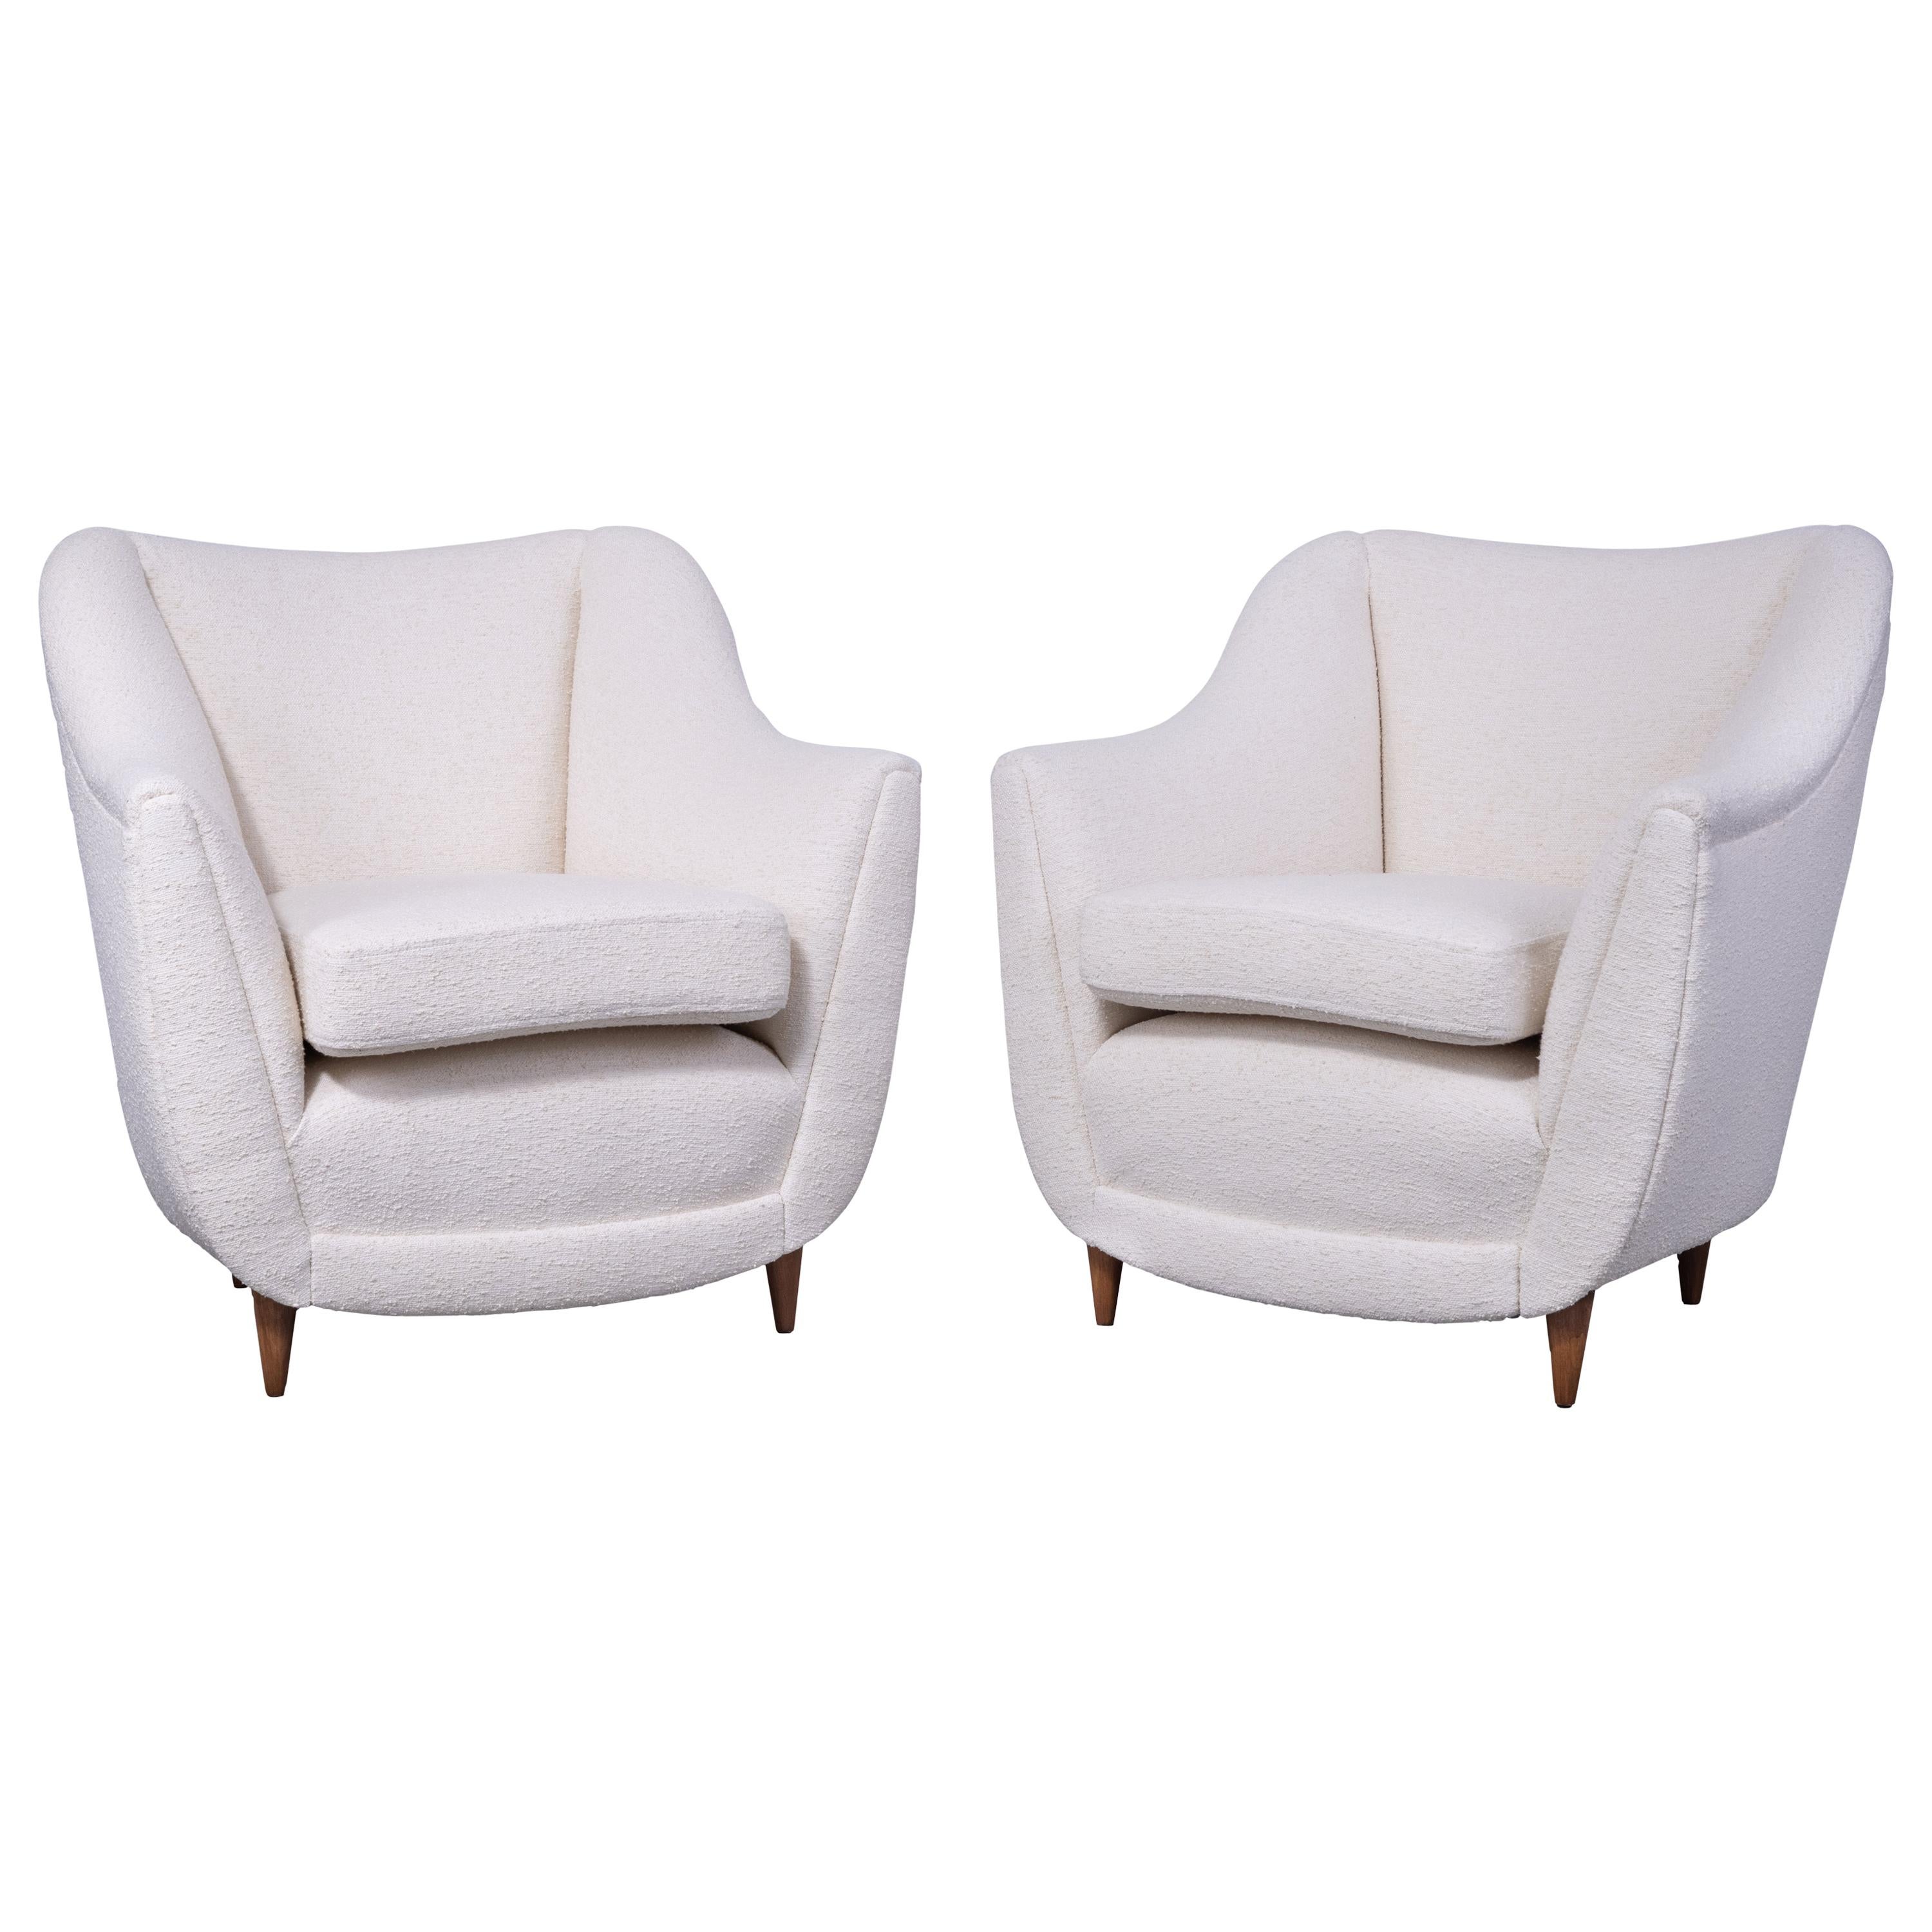 Pair of Armchairs in Gio Ponti Style, Italy 1950s, in Nobilis Bouclette